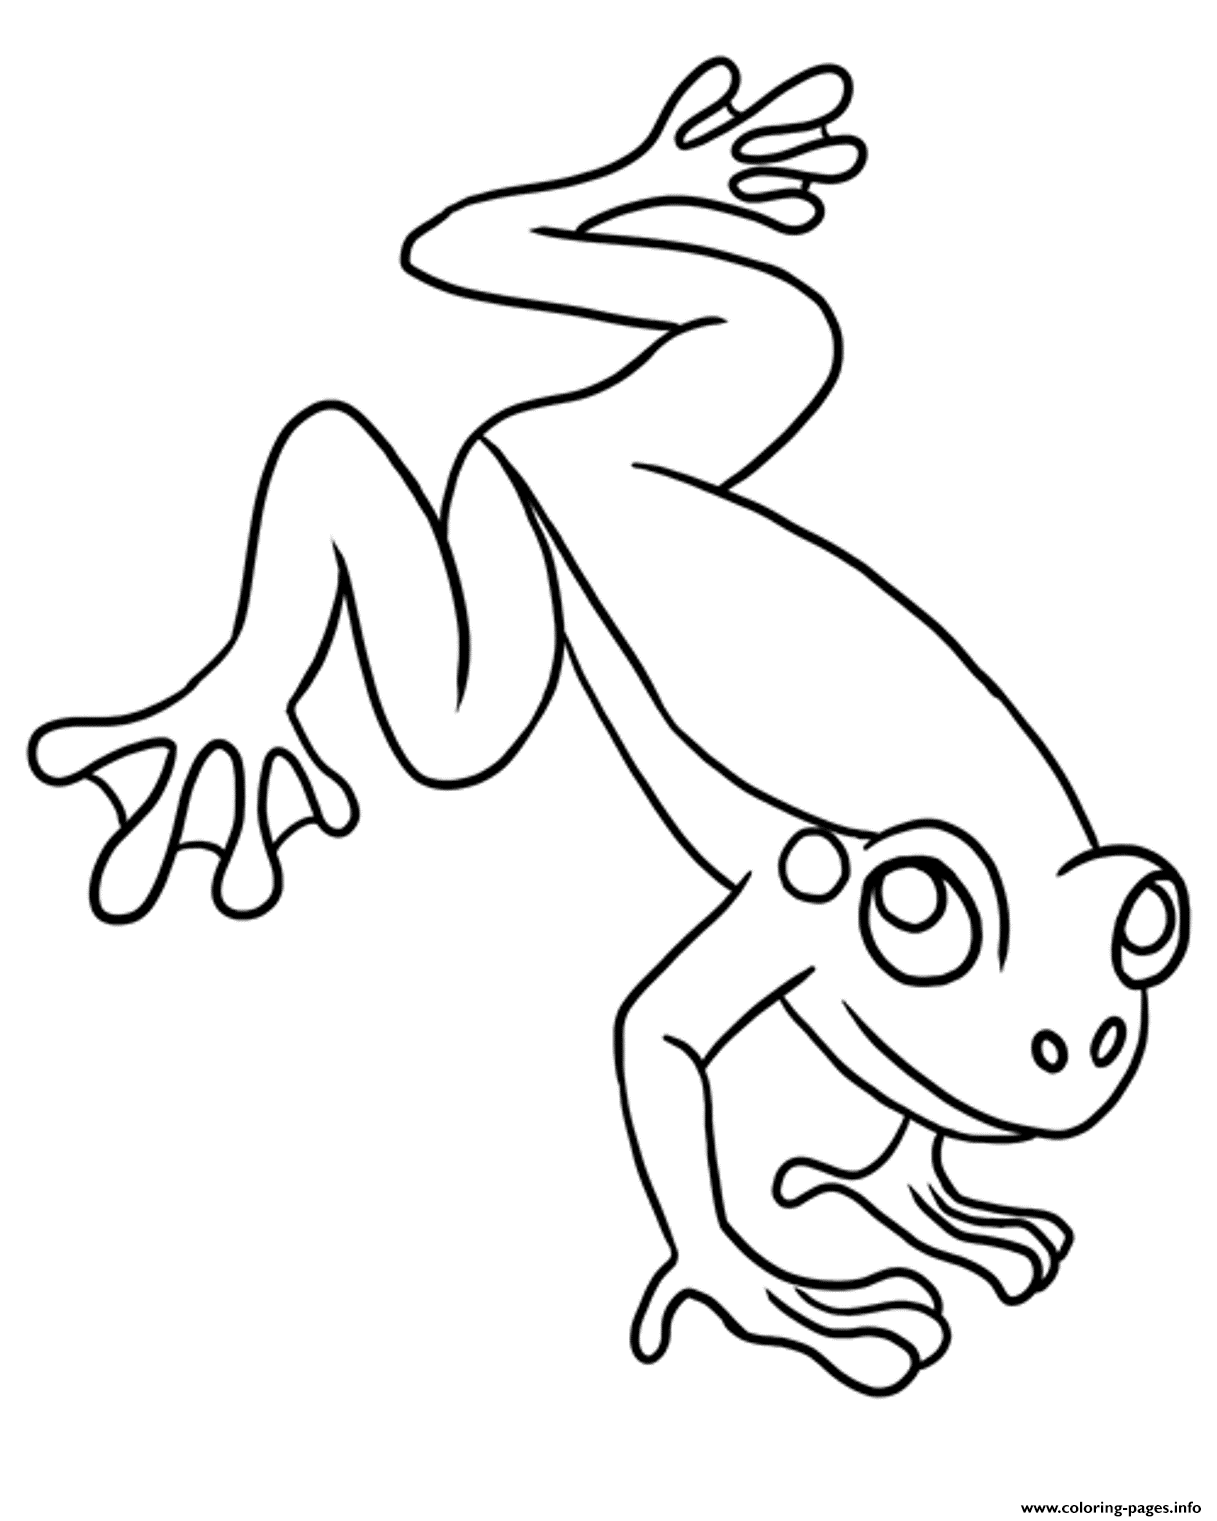 Frog S For Kids Printabled9ca coloring